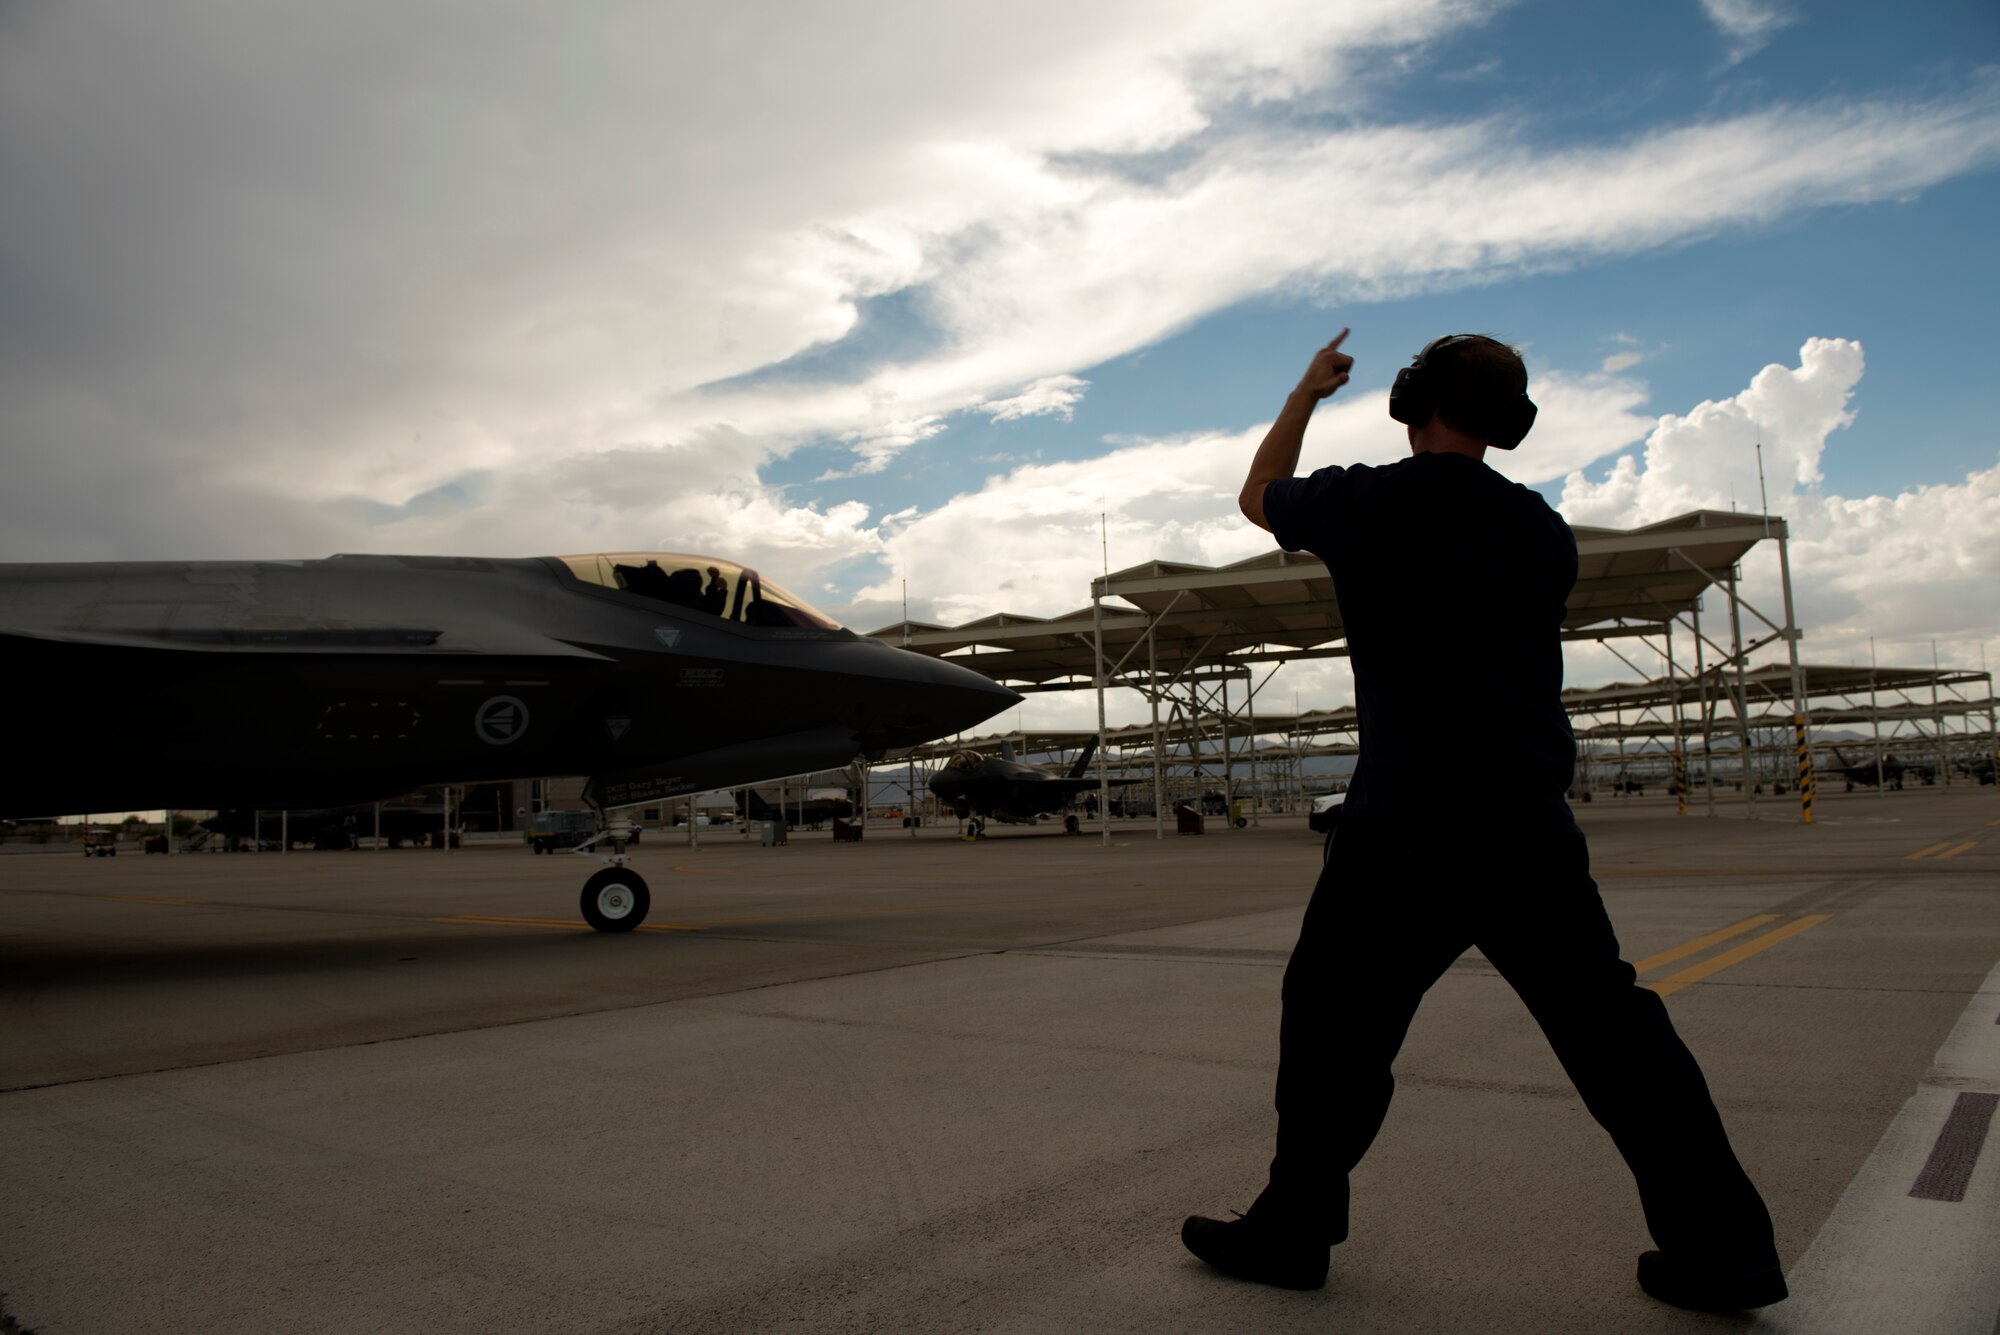 A 62nd Aircraft Maintenance Unit crew chief taxis out a 62nd Fighter Squadron F-35A Lightning II for a training sortie Aug. 22, 2018, at Luke Air Force Base, Ariz.